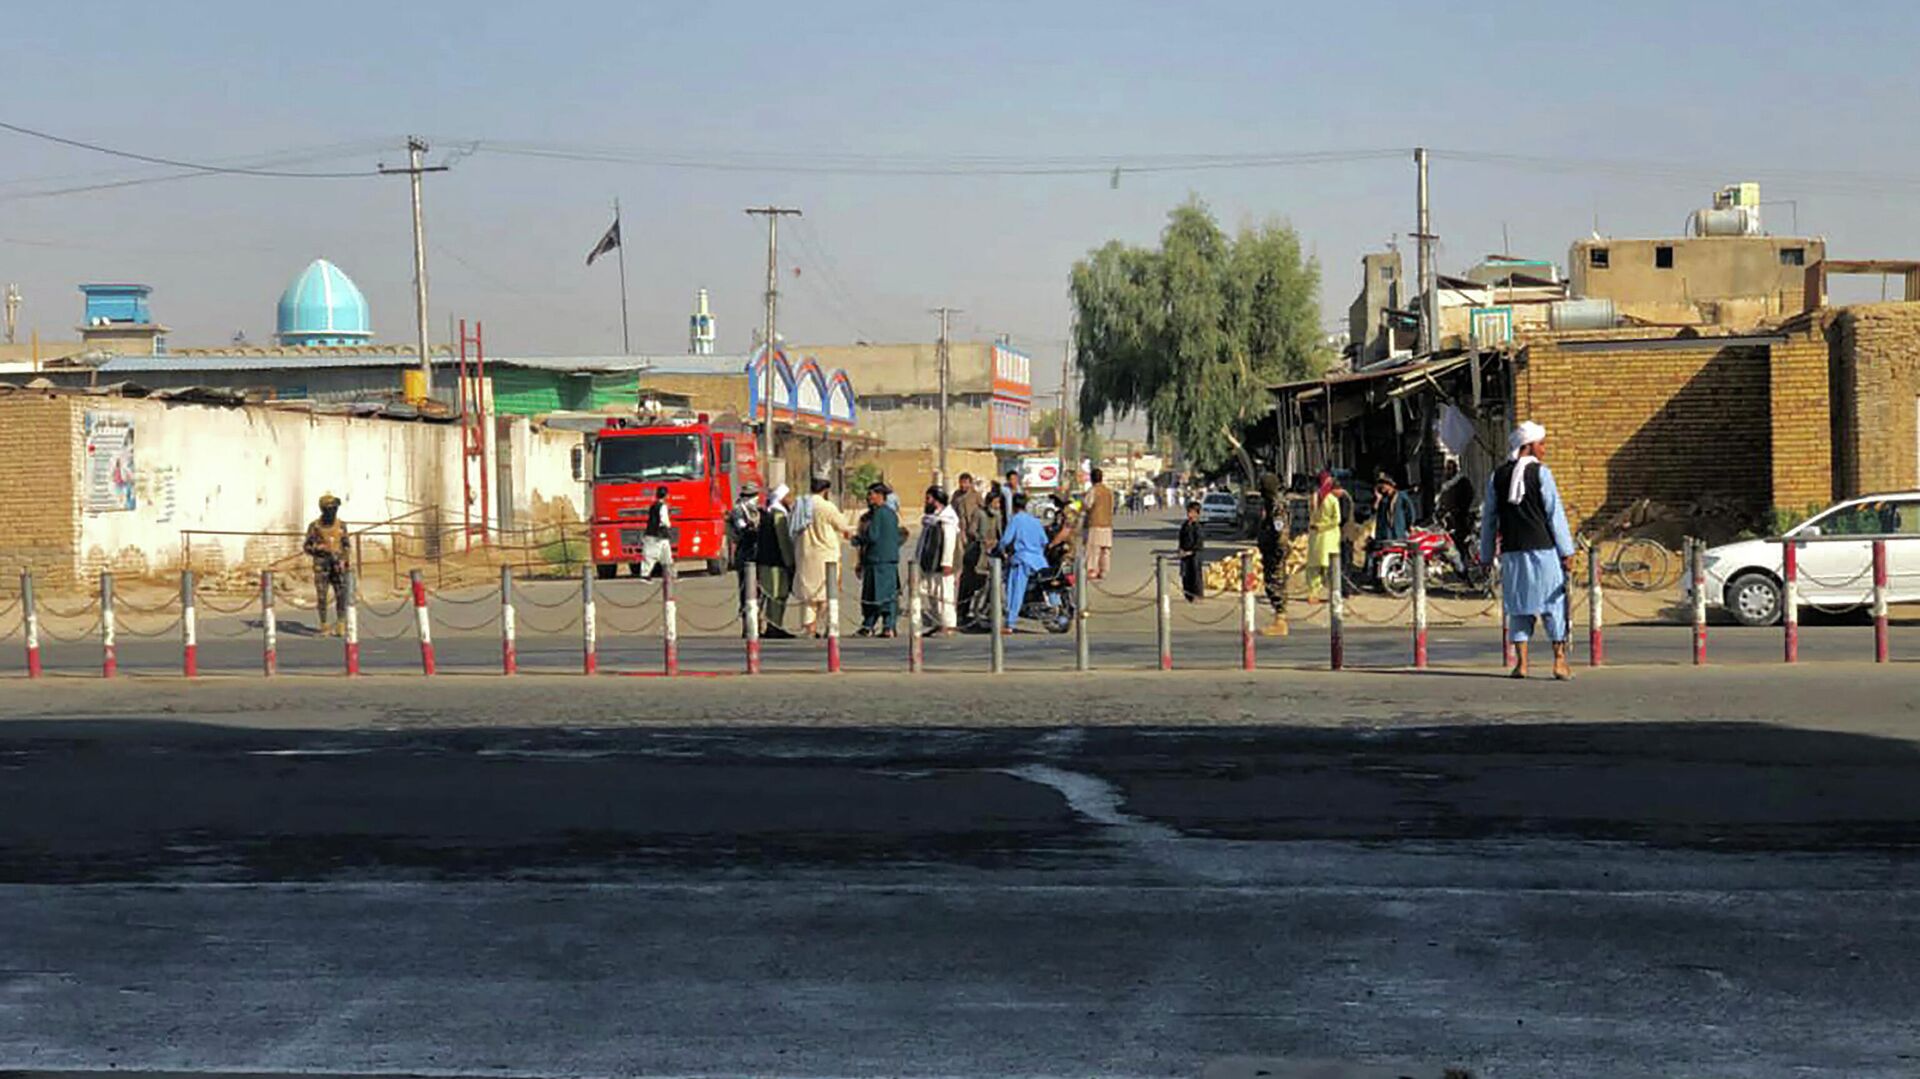 Members of Taliban stand guard near a Shiite mosque in Kandahar province on October 15, 2021, after at least 16 people were killed and 32 wounded when explosions hit a Shiite mosque - Sputnik International, 1920, 15.10.2021